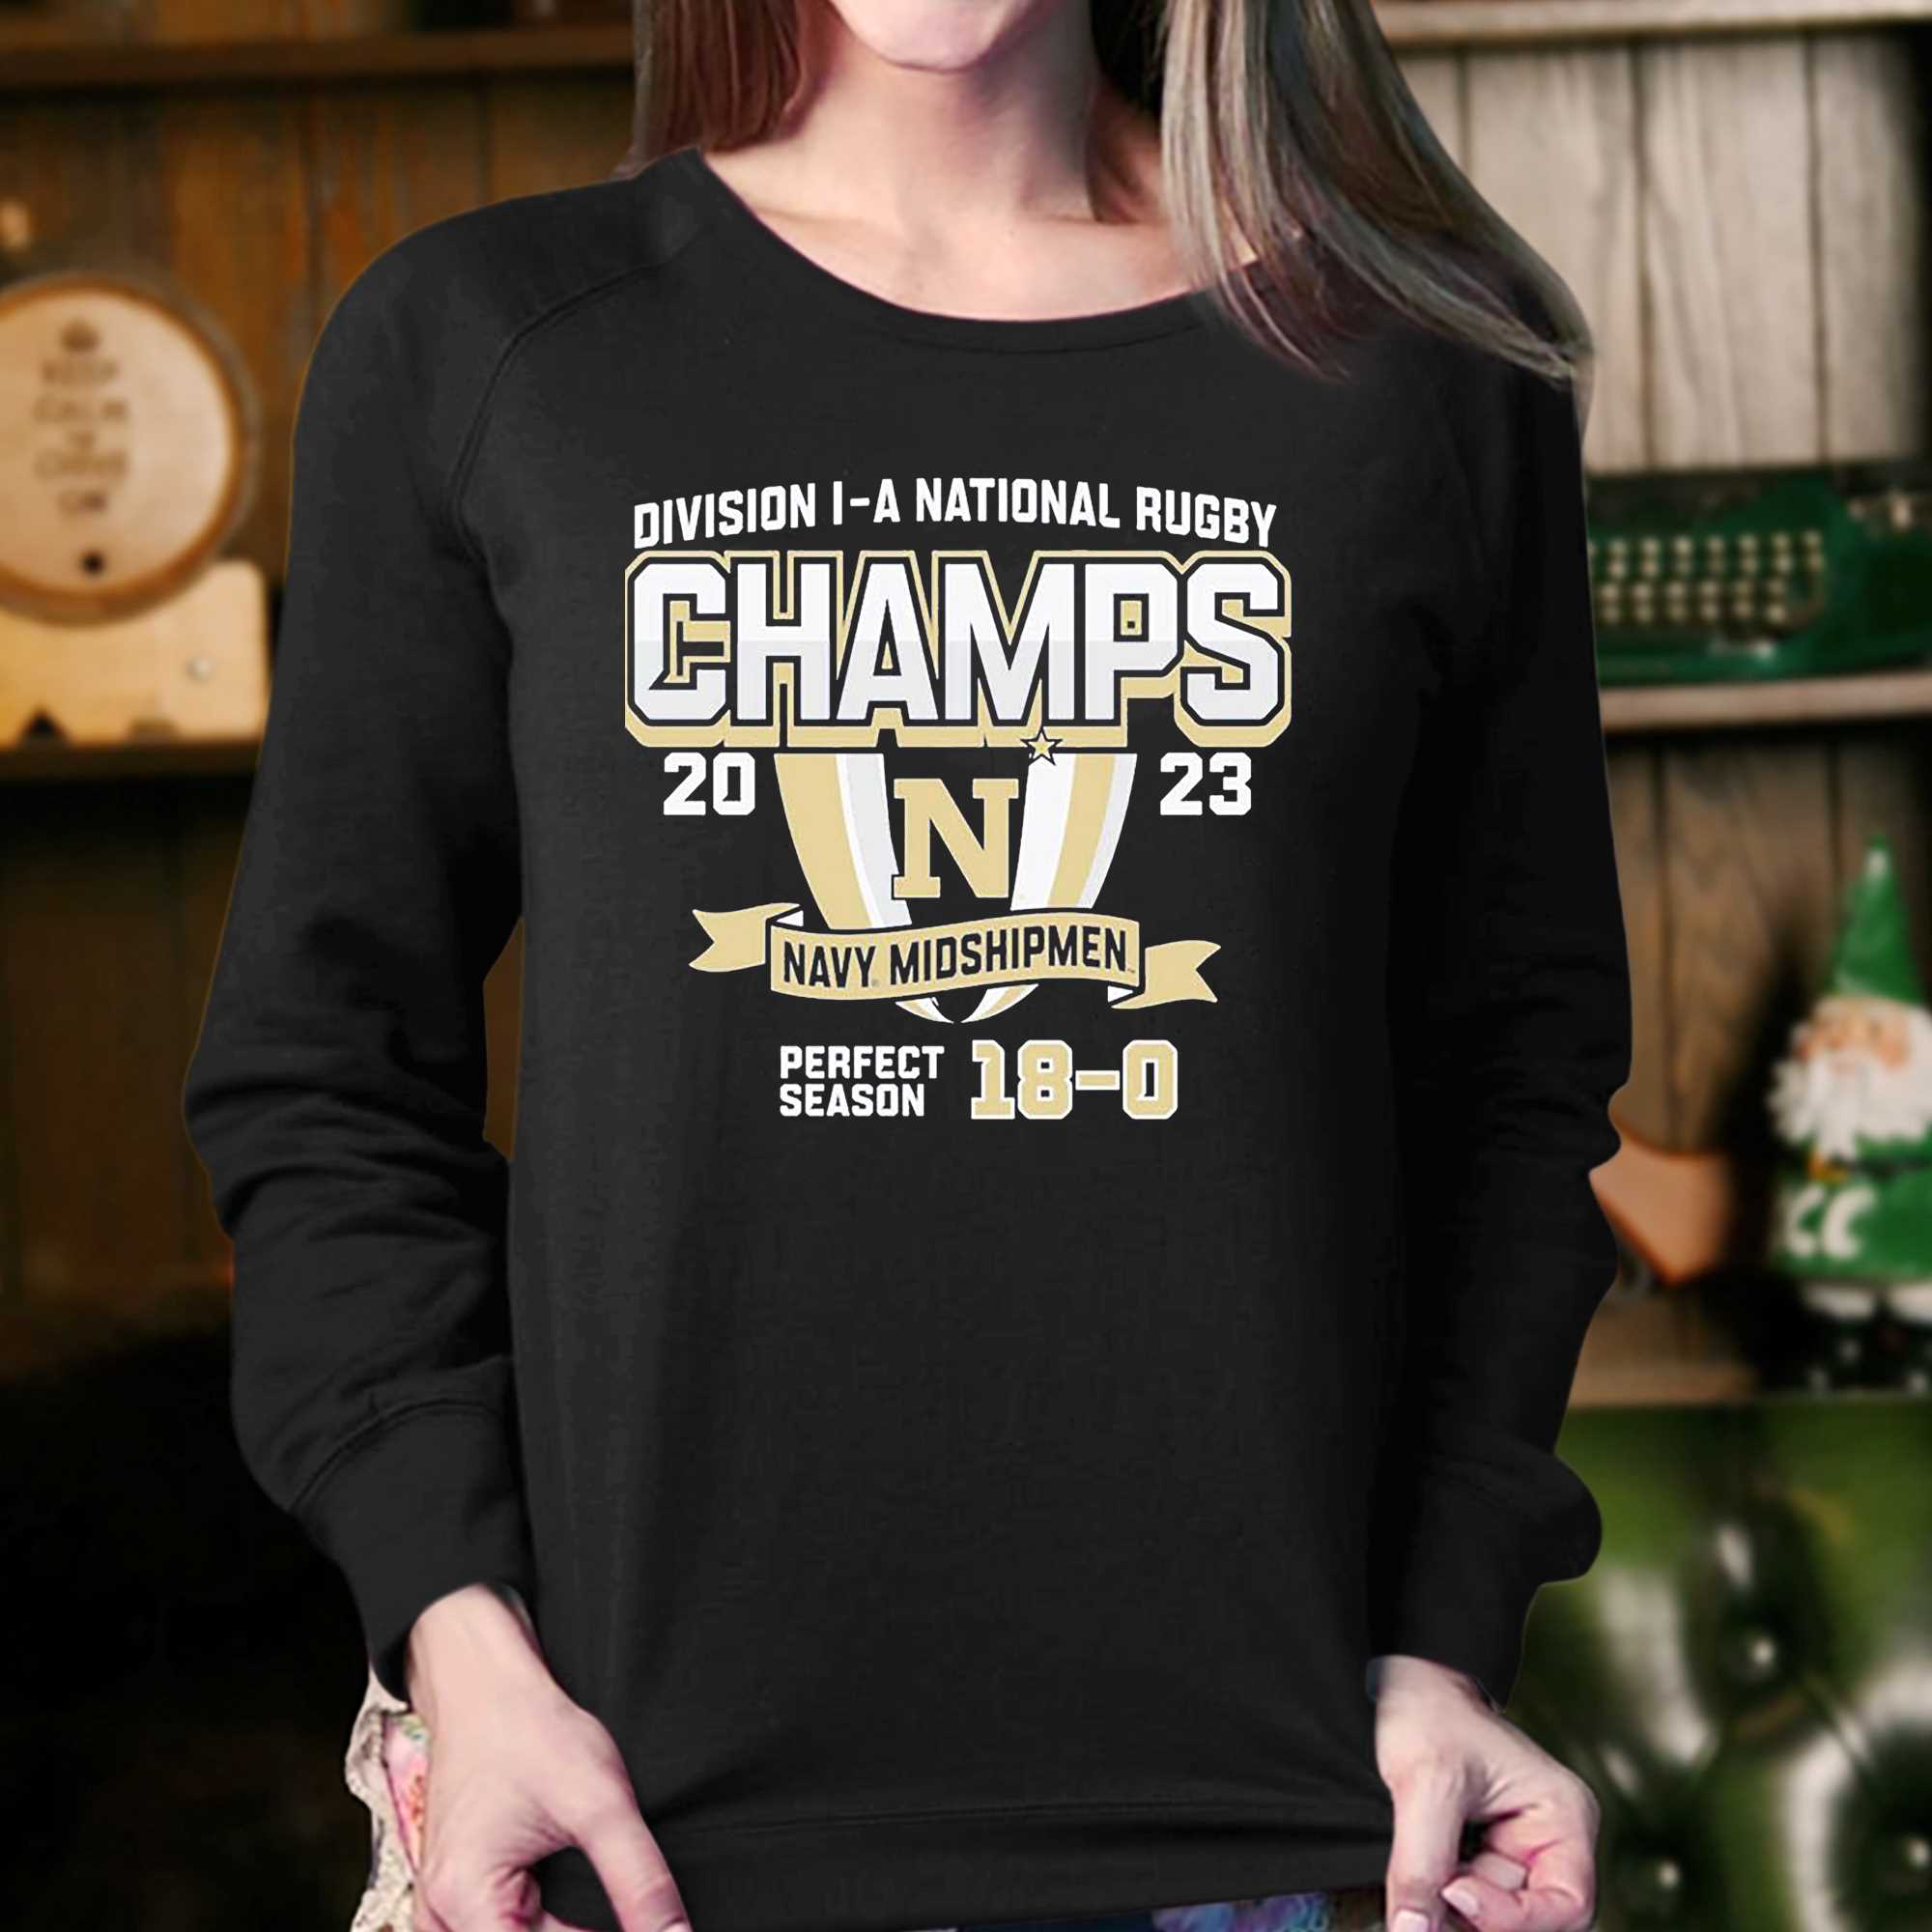 Midshipmen Division I-a National Rugby Champions 2023 Shirt 